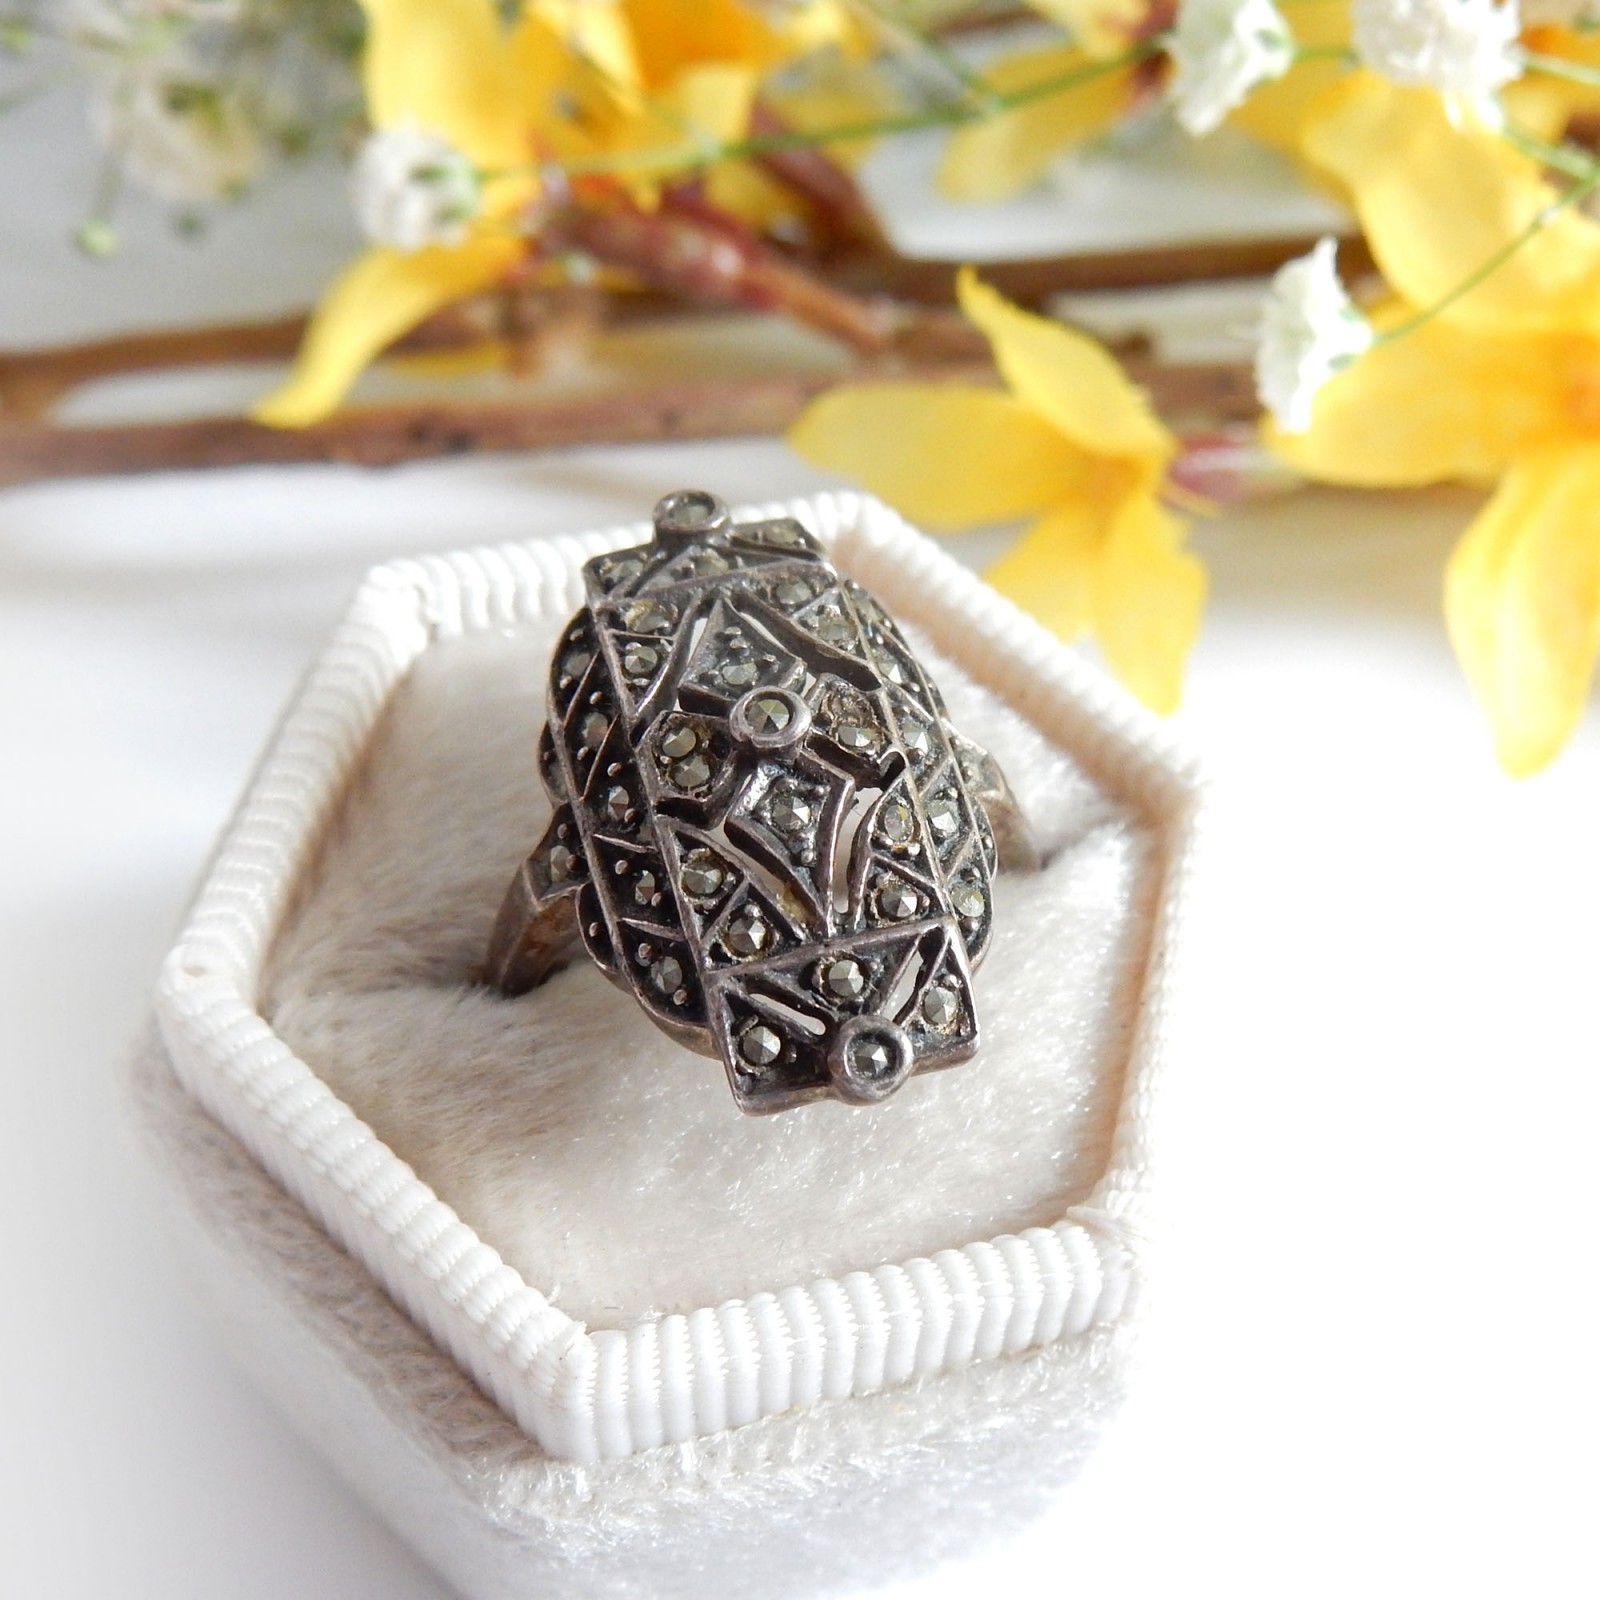 Vintage Marcasite Ring Size 7 Long Ring Size 7 Long Marcasite Ring Woman Ring Size 7 Art Deco Ring Size 7 Sterling Silver Ring BoHo Ring